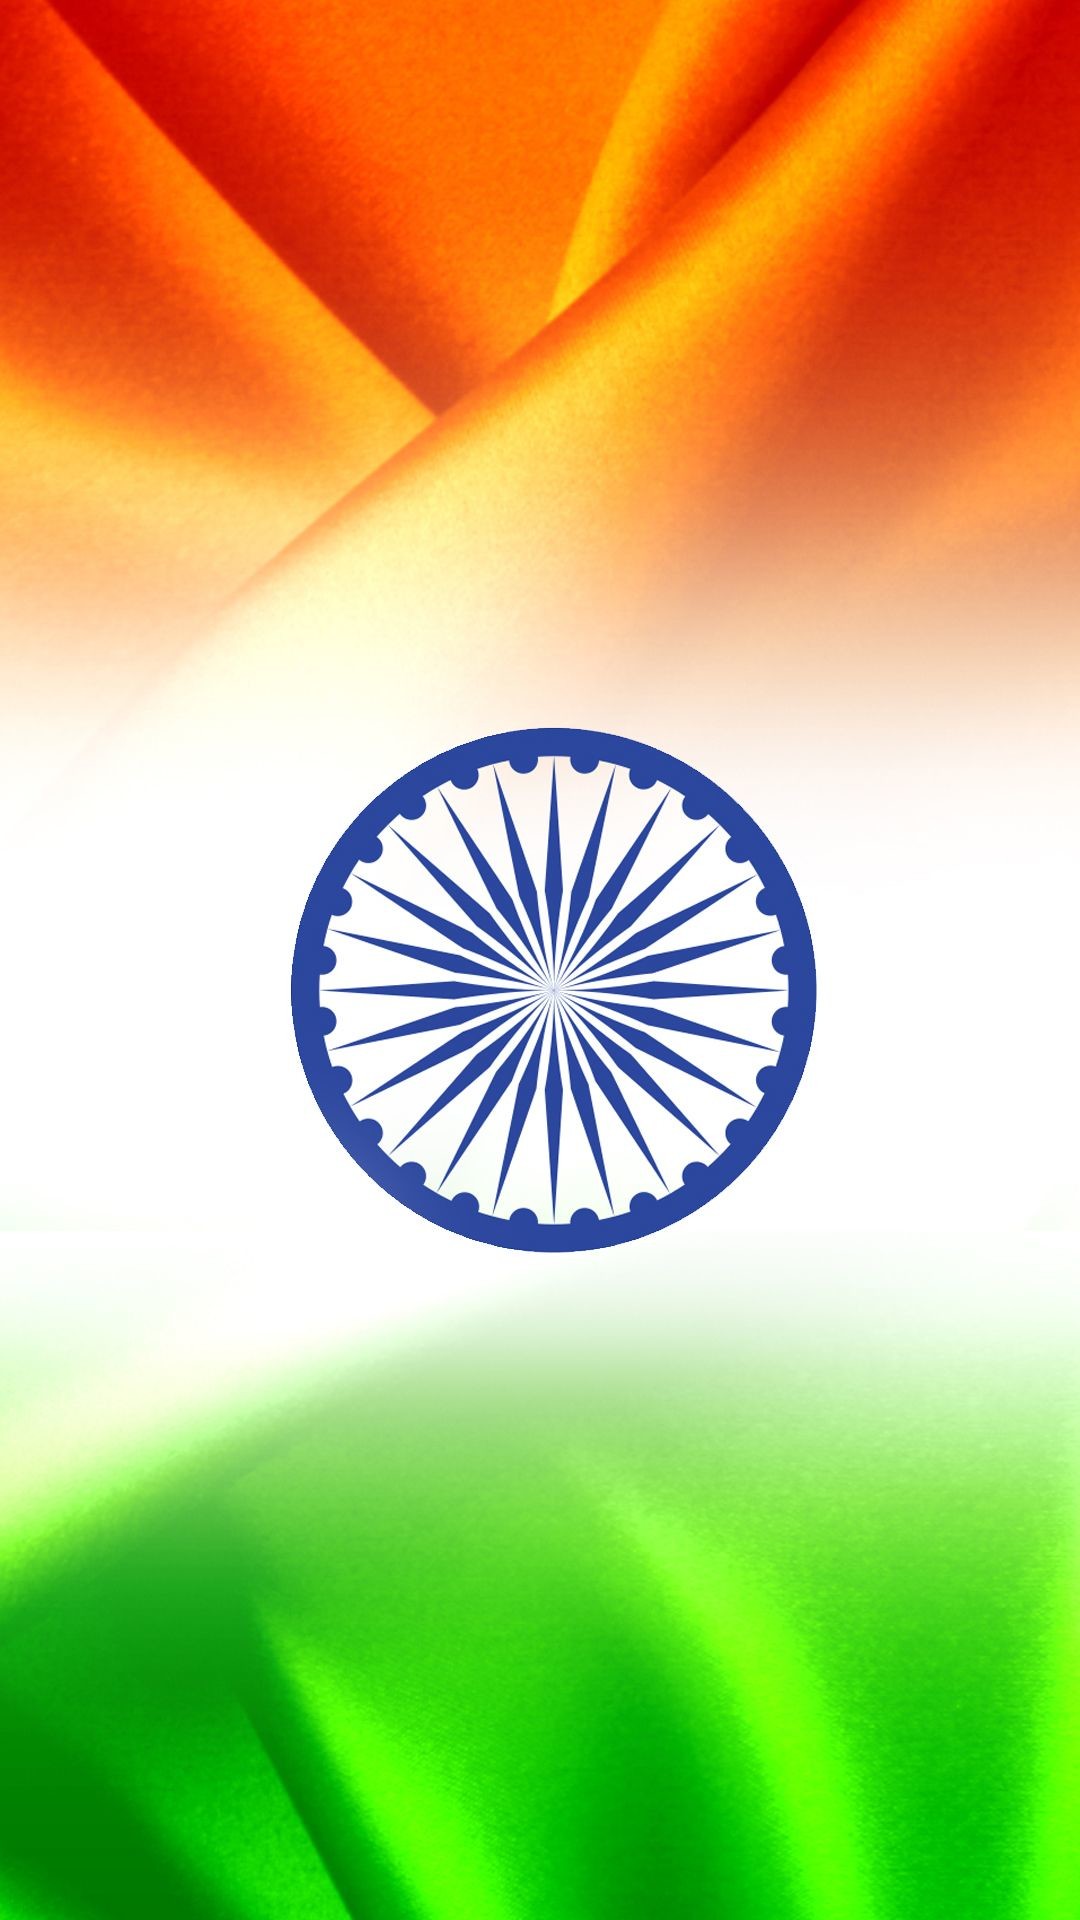 1080x1920 India Flag for Mobile Phone Wallpaper 11 of 17 – Tricolour India .